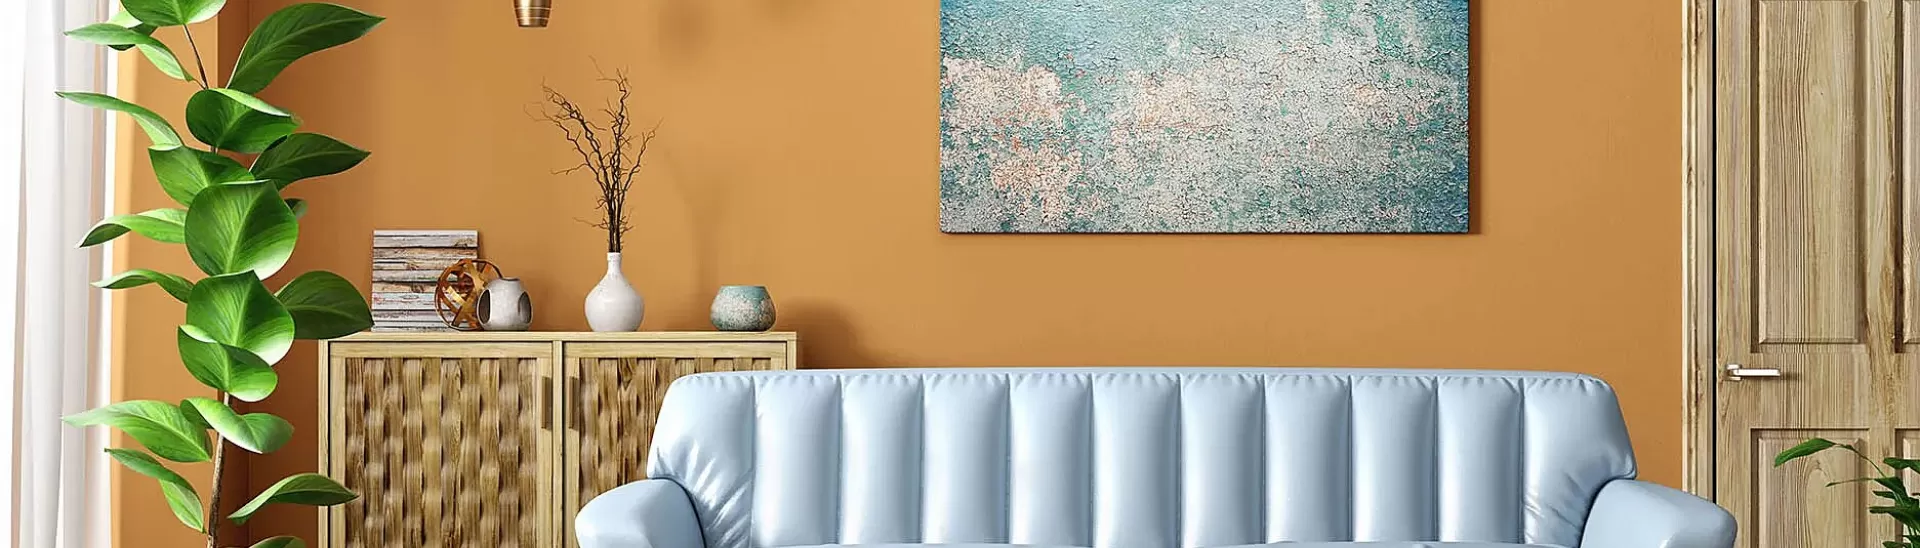 Find a Color Chart for All Your Home Painting Projects